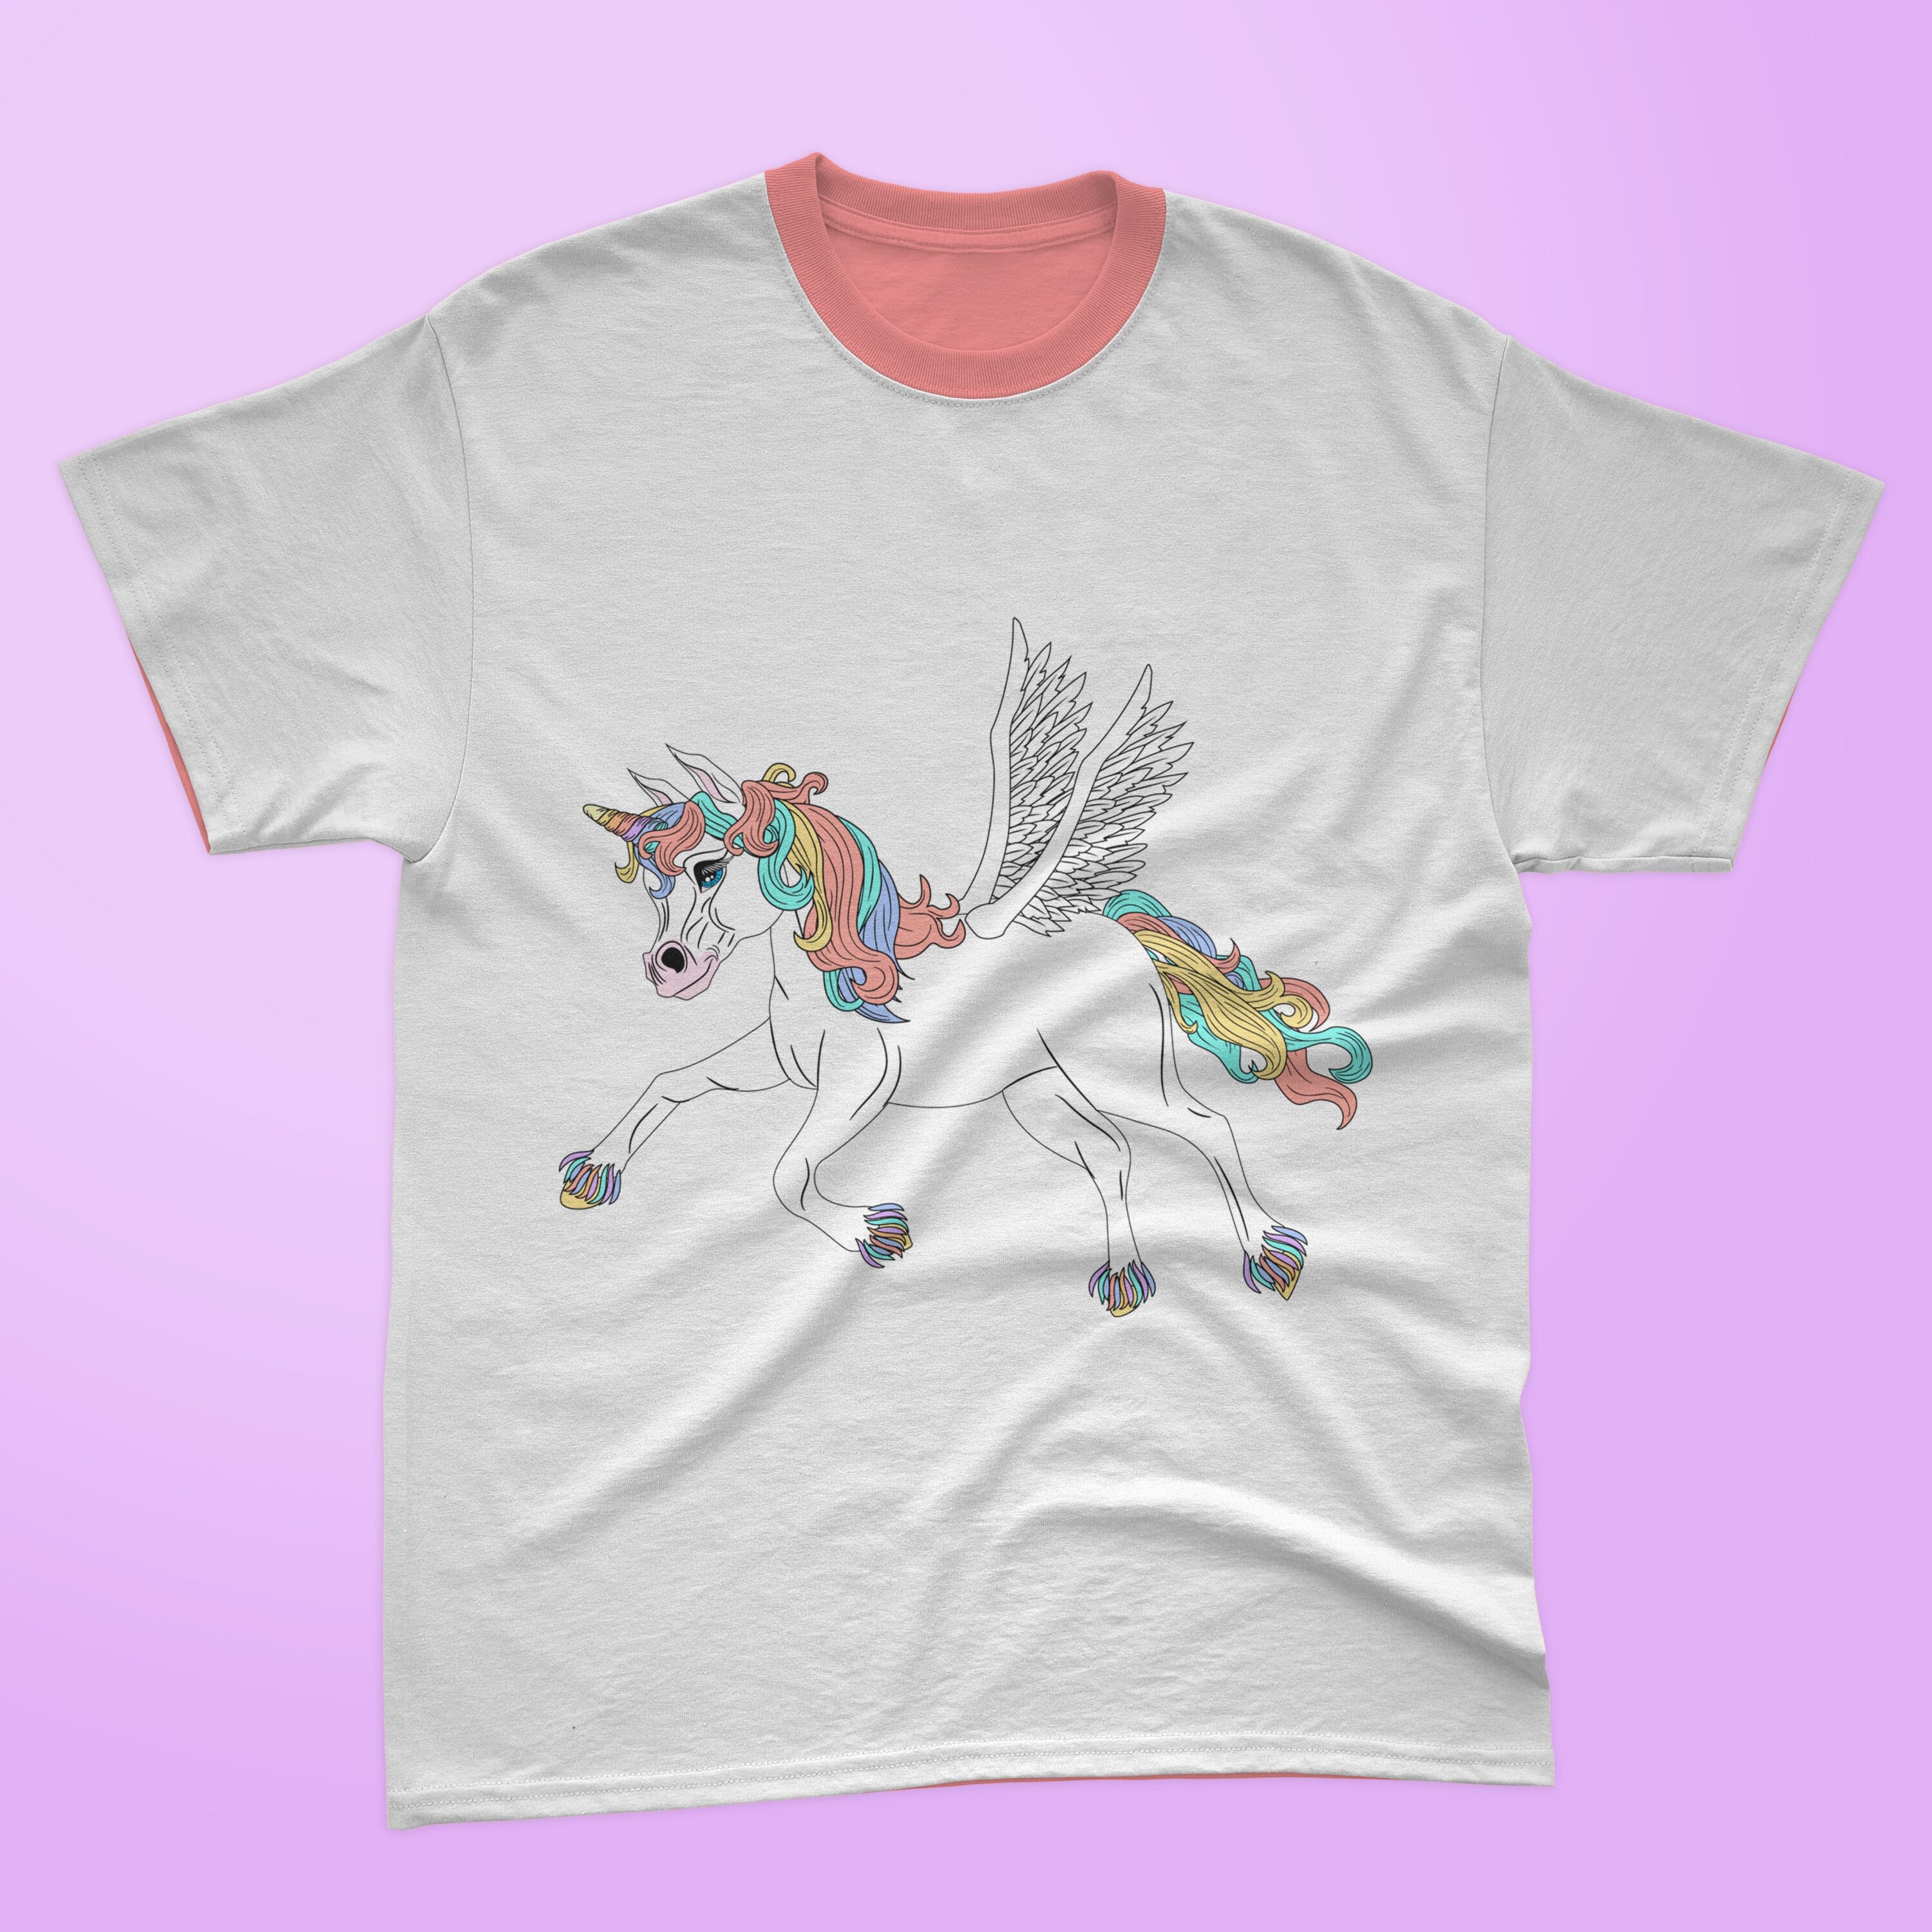 Gray t-shirt with a pink collar and a magical flying unicorn on a lavender background.